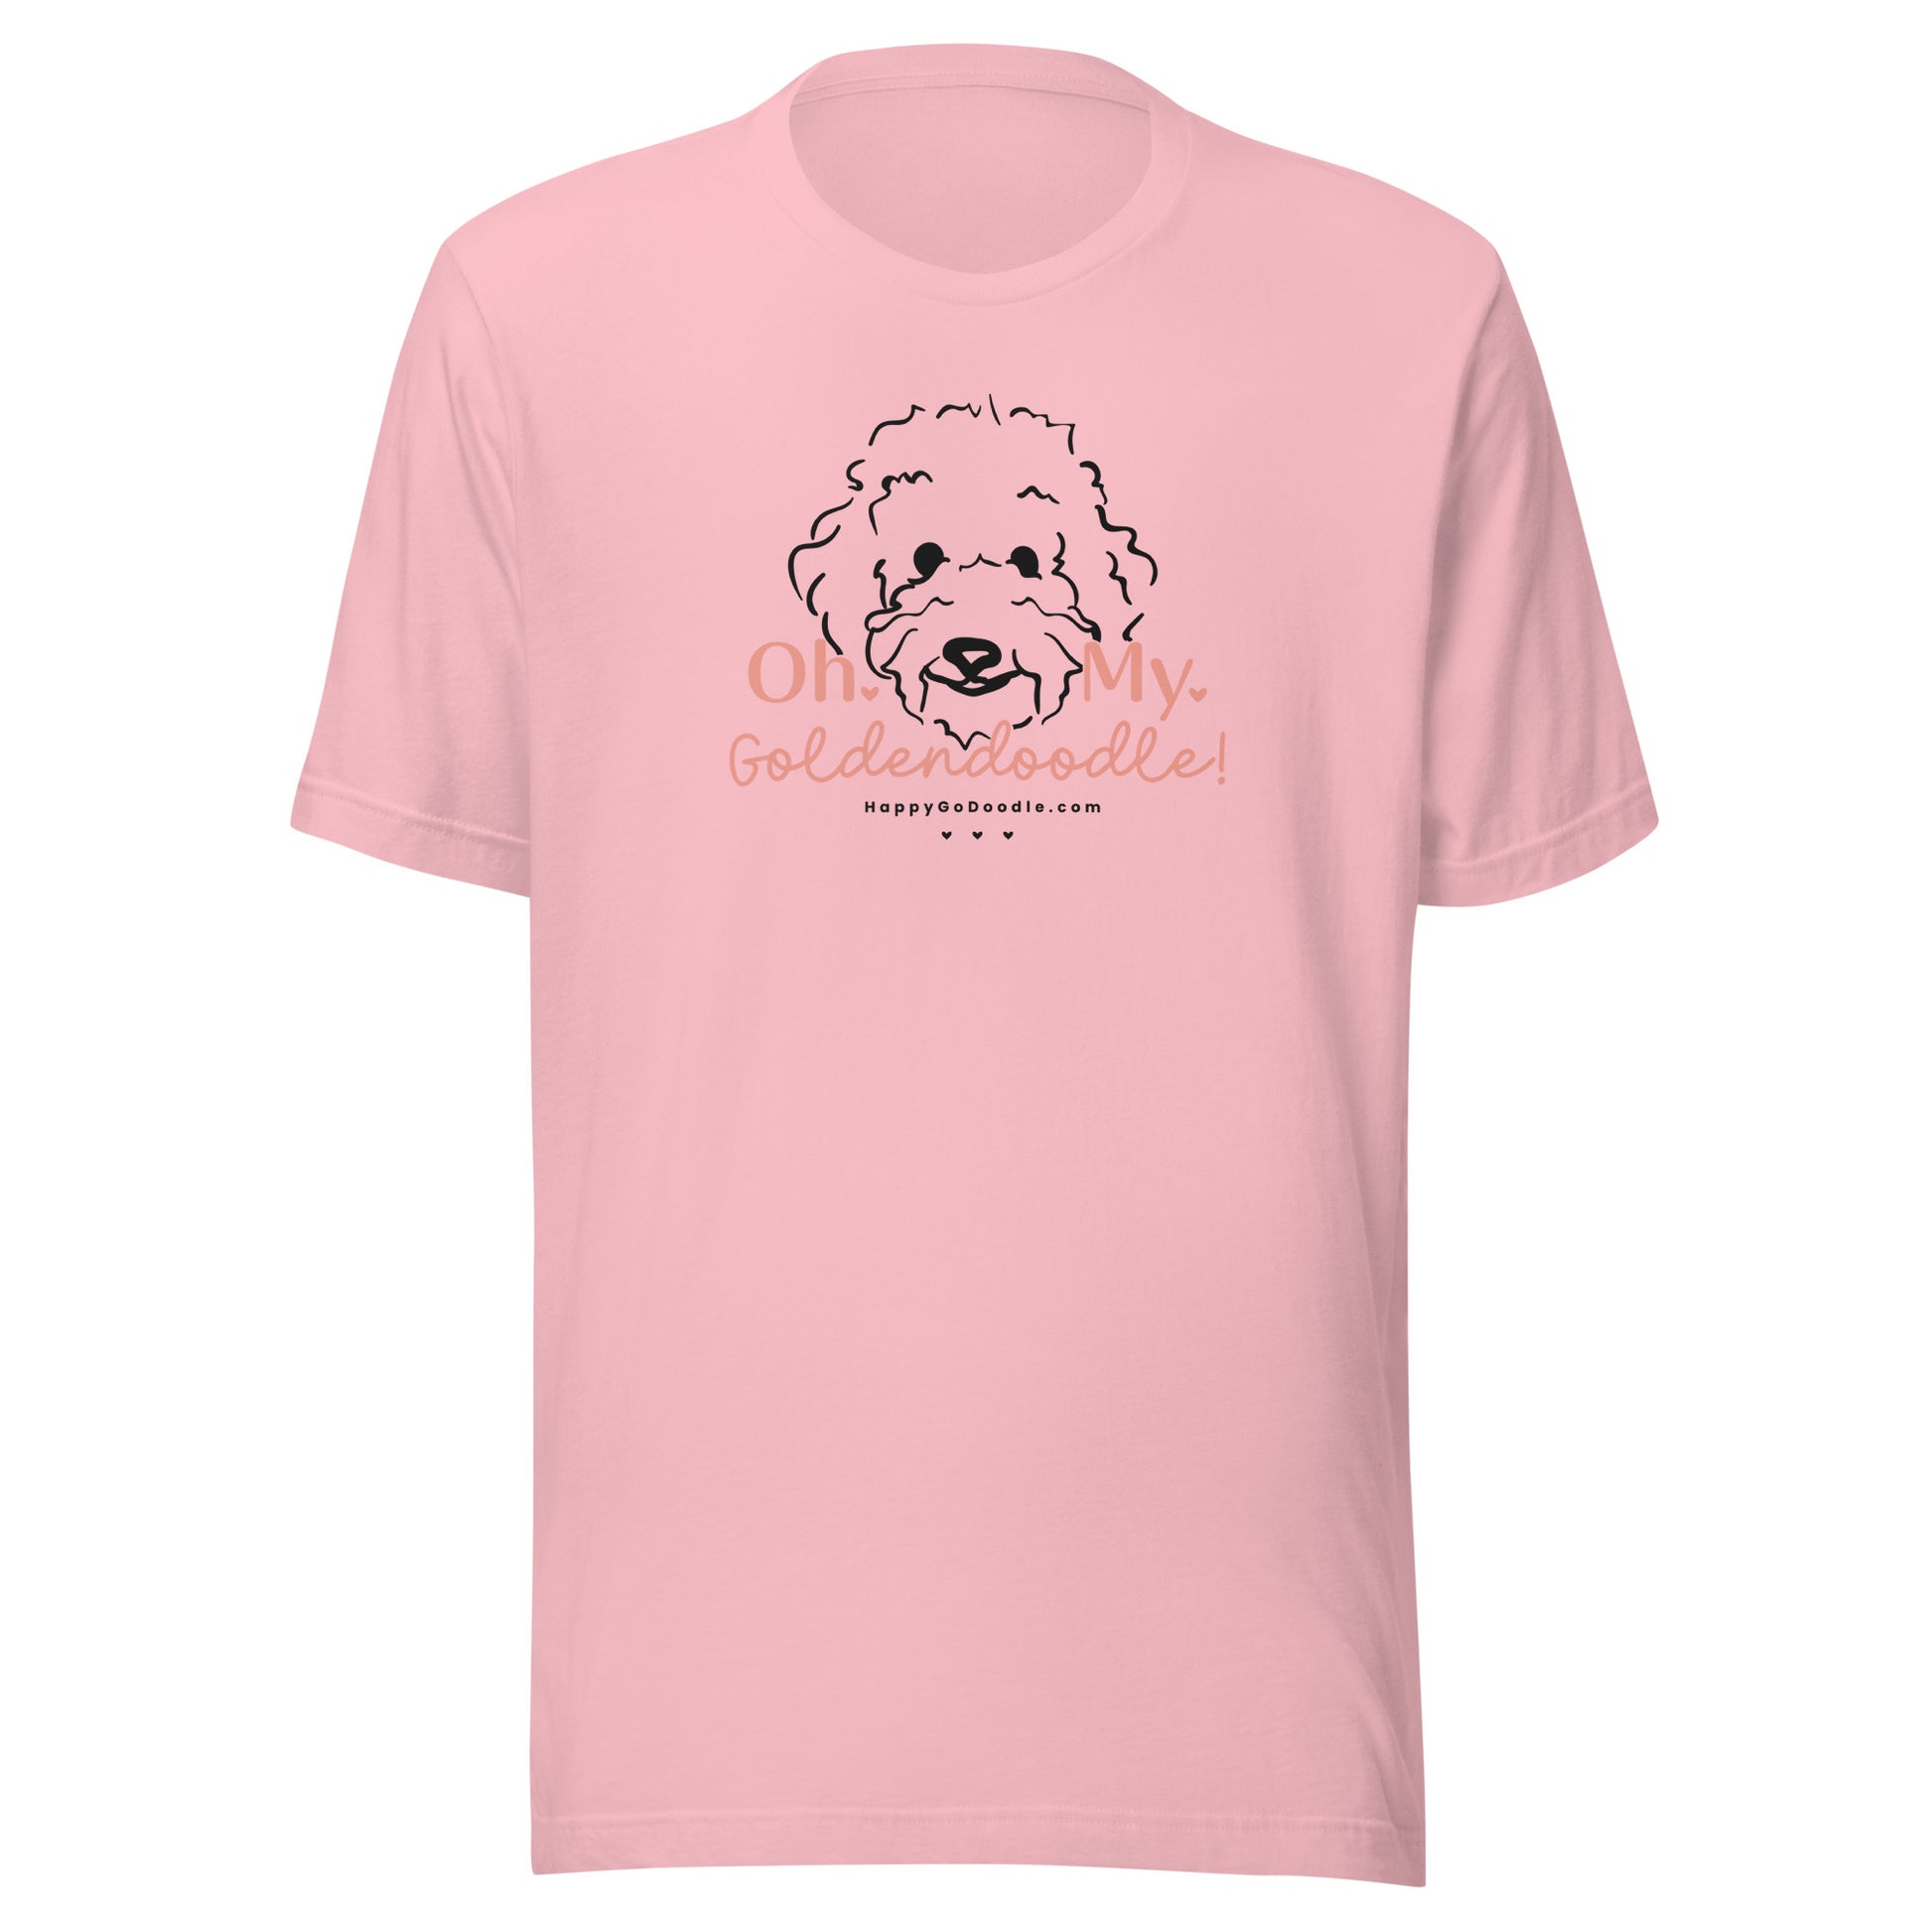 Goldendoodle t-shirt with Goldendoodle dog face and words "Oh My Goldendoodle" in pink color